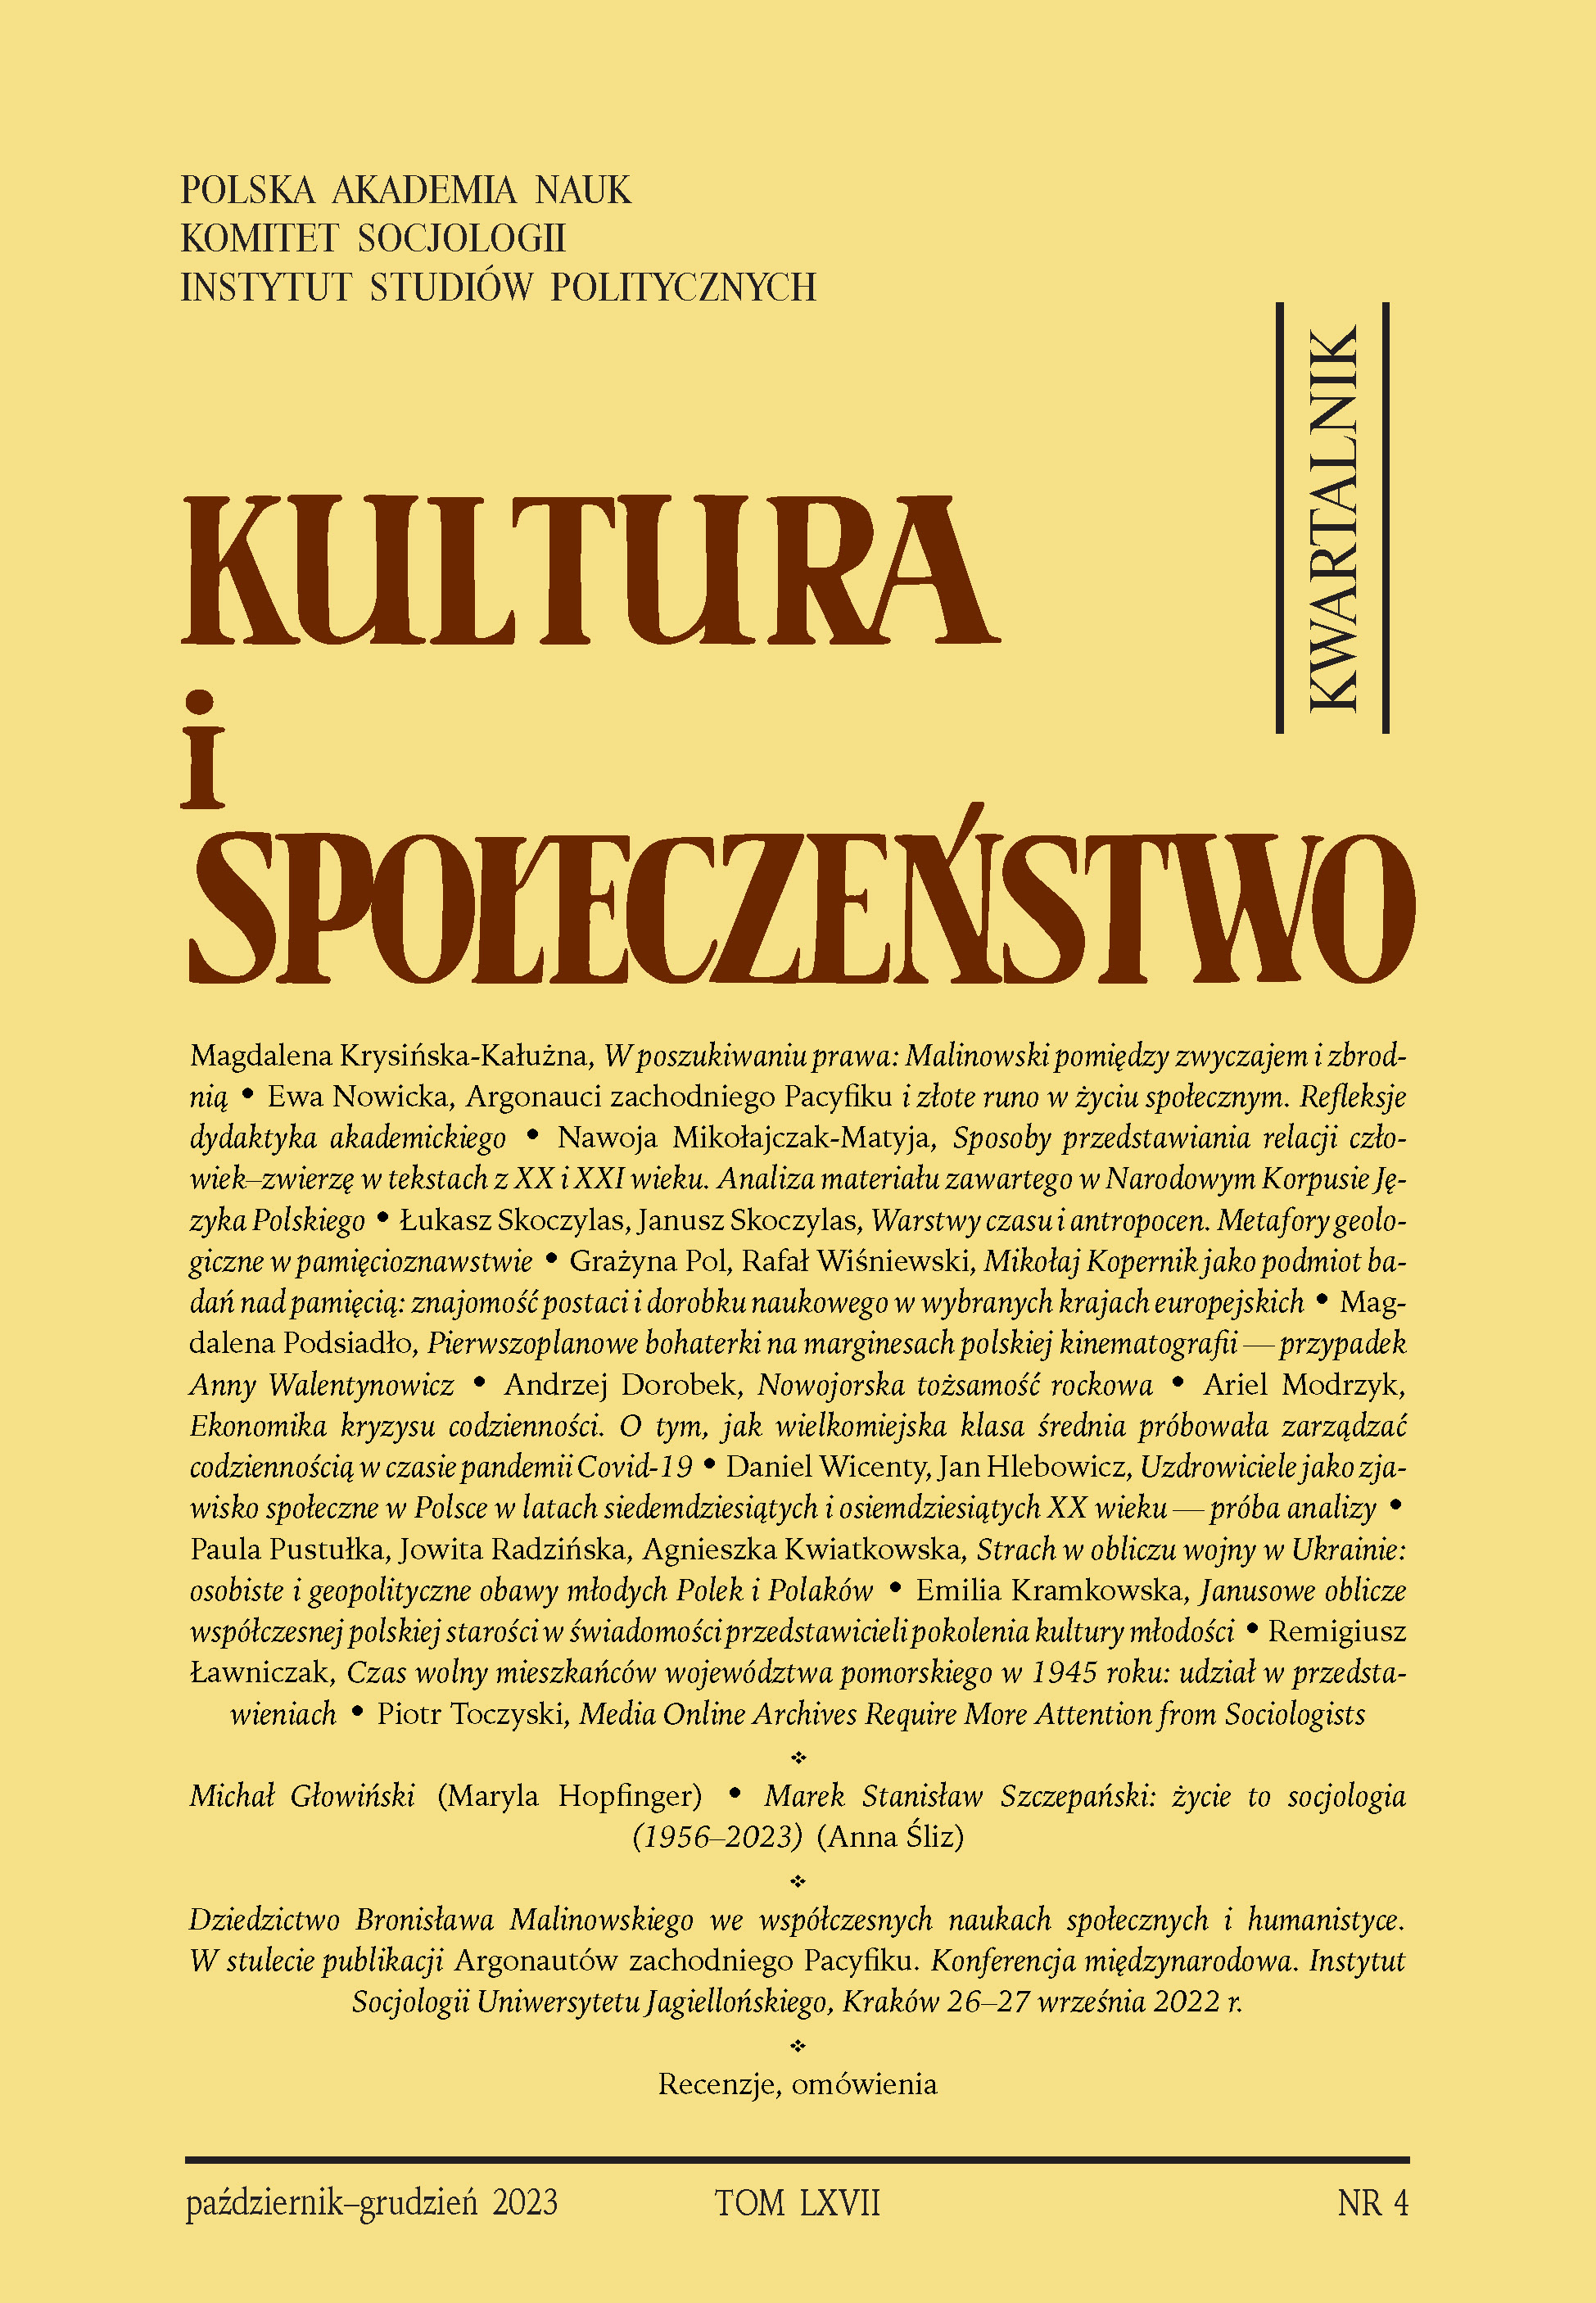 METHODS OF PRESENTING HUMAN-ANIMAL RELATIONSHIPS
IN TEXTS FROM THE 20th AND 21st CENTURIES.
ANALYSIS OF MATERIALS FROM THE NATIONAL CORPUS OF POLISH Cover Image